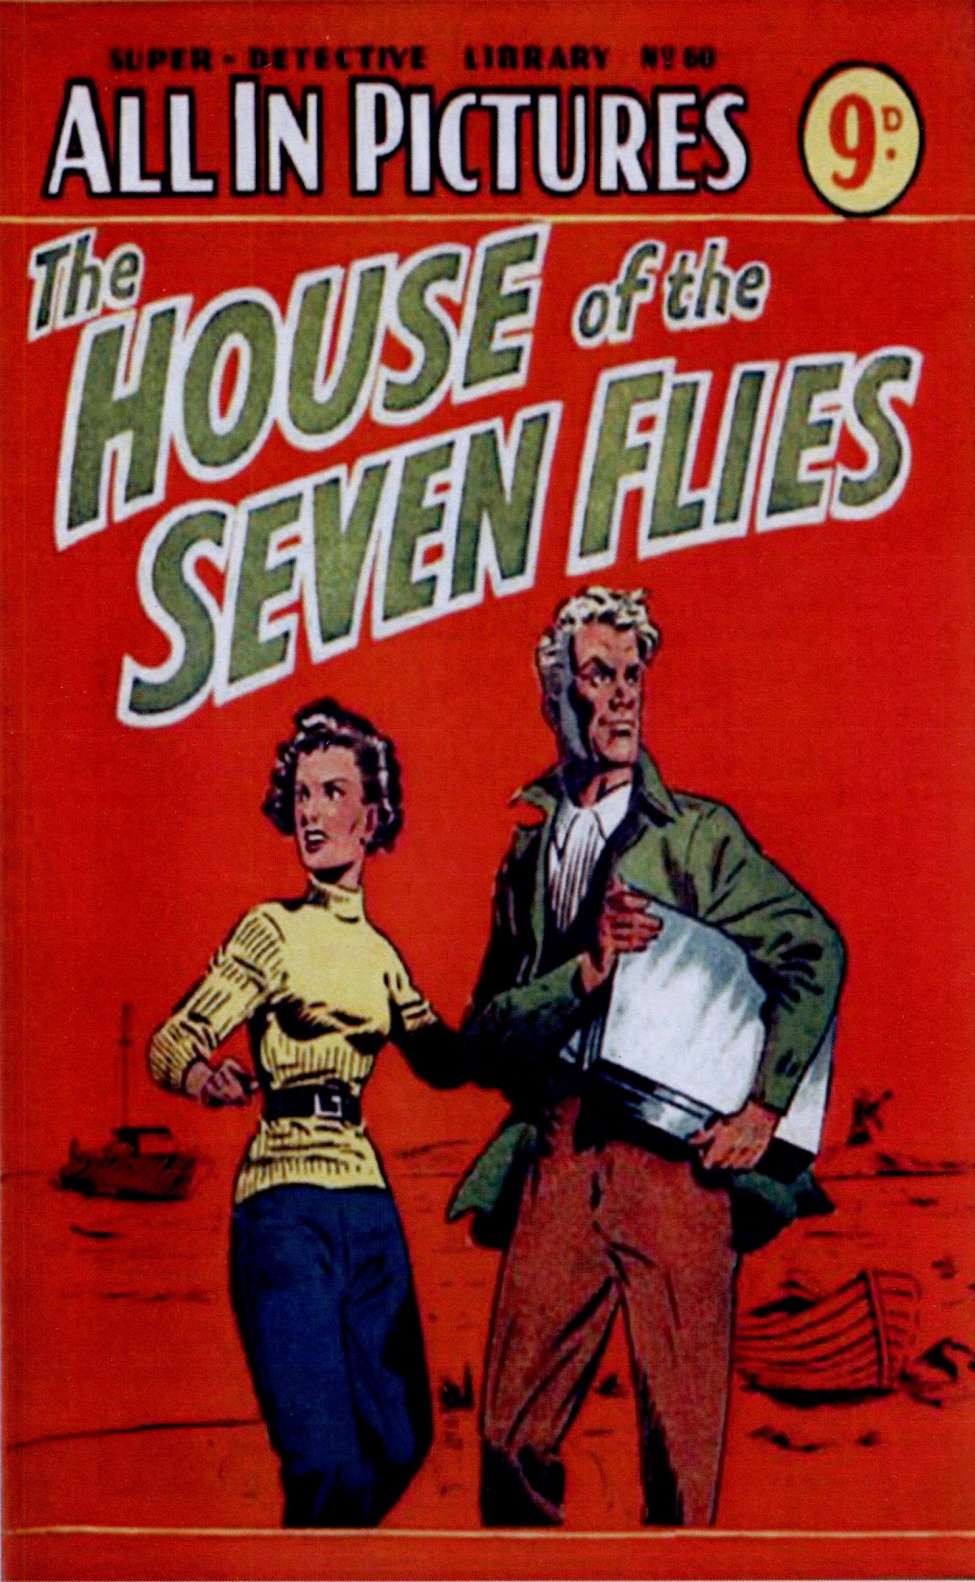 Comic Book Cover For Super Detective Library 60 - The House of the Seven Flies